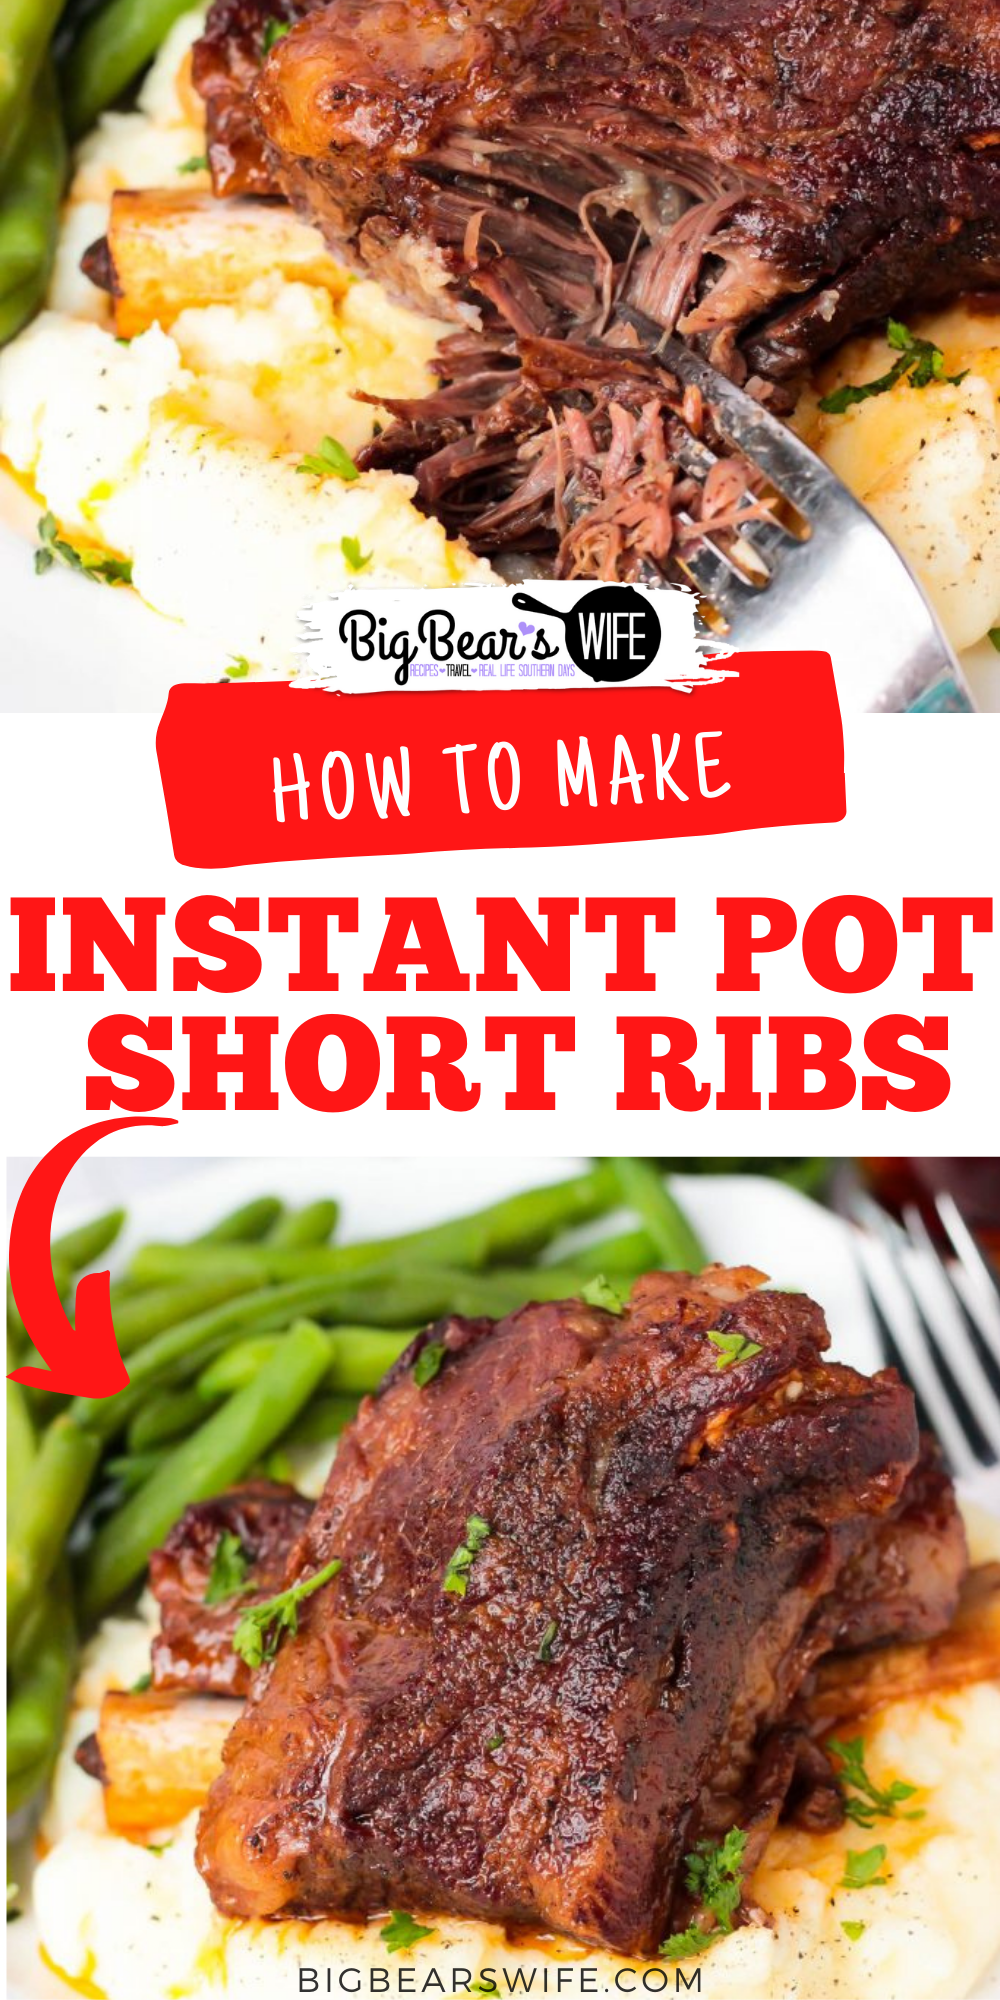 Instant Pot Short Ribs - These Instant Pot Short Ribs are my super tender and packed with tons of wonderful flavor! This recipe is my new version of my super popular Slow Cooker Short Rib recipe that I've adapted to work with the Instant Pot electric pressure cooker! #InstantPot #ShortRib #Recipe via @bigbearswife